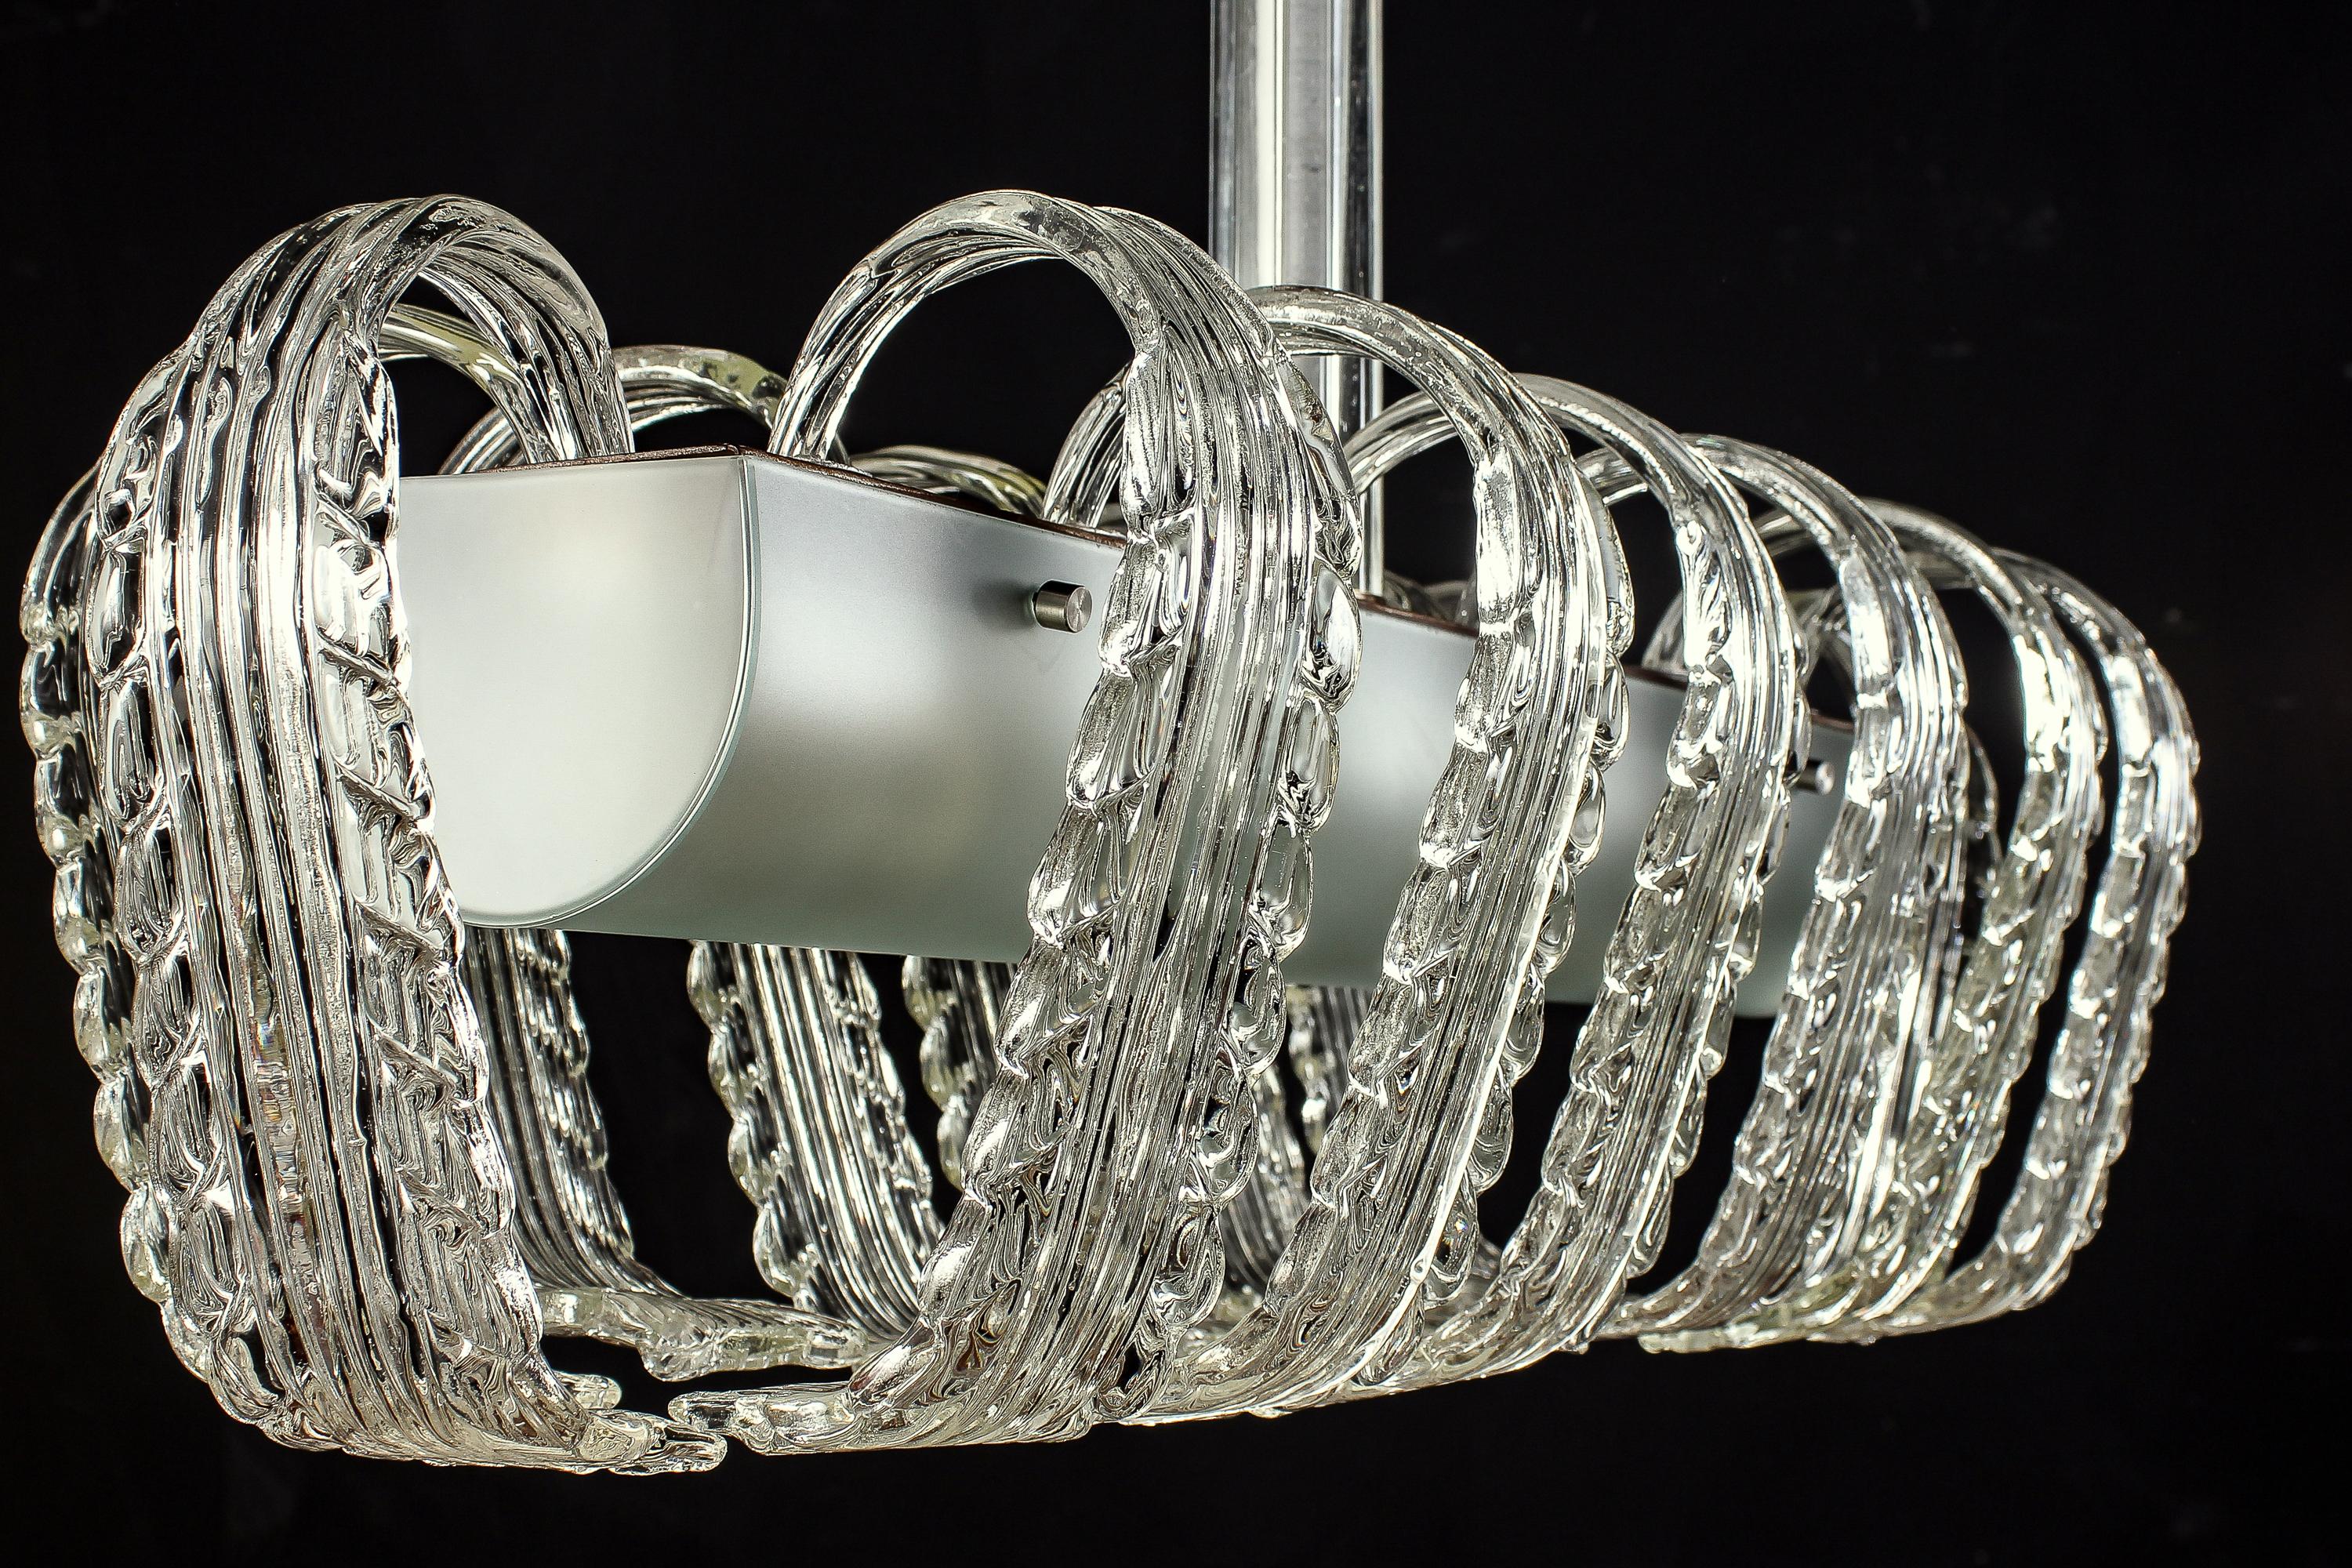 Fabulous Art Deco Murano glass rectangular shape chandelier with central light green glass support enriched with precious hand blown glass leaves.
Similar examples catalogue blue 134.